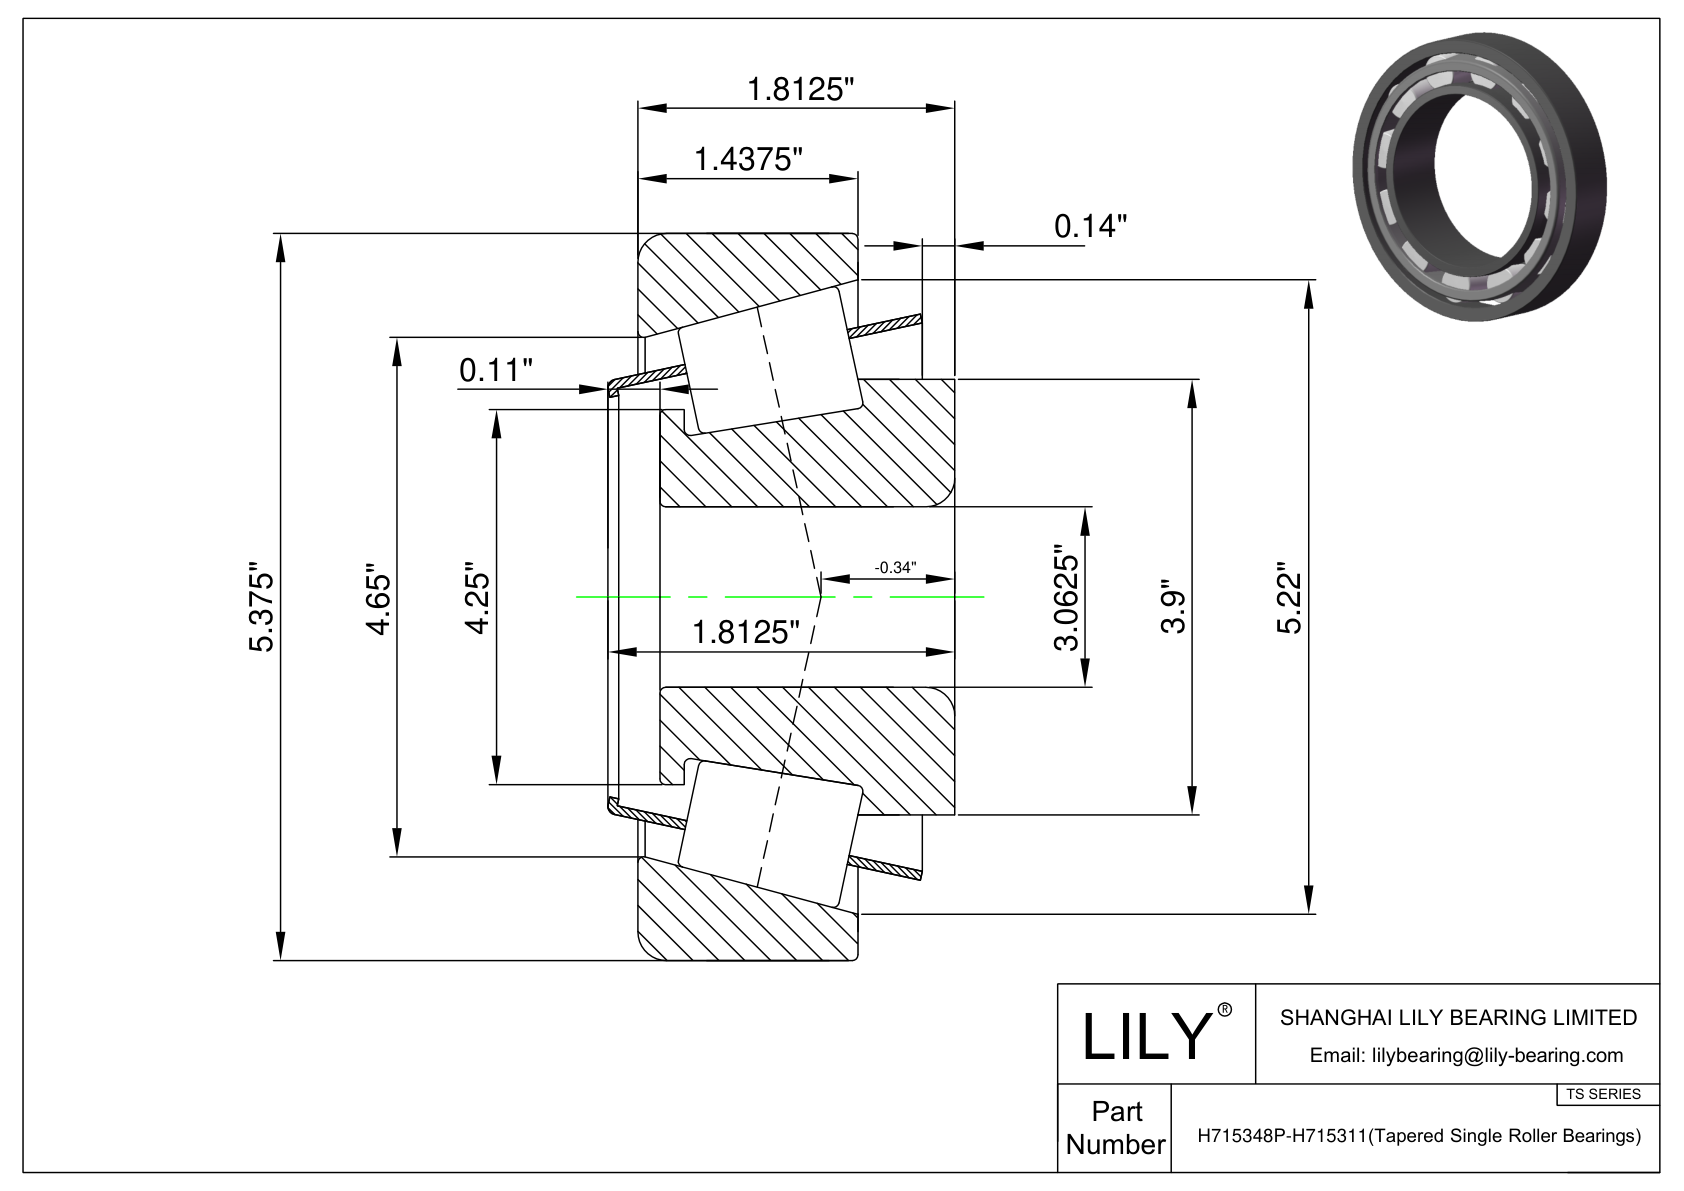 H715348P-H715311 TS (Tapered Single Roller Bearings) (Imperial) cad drawing